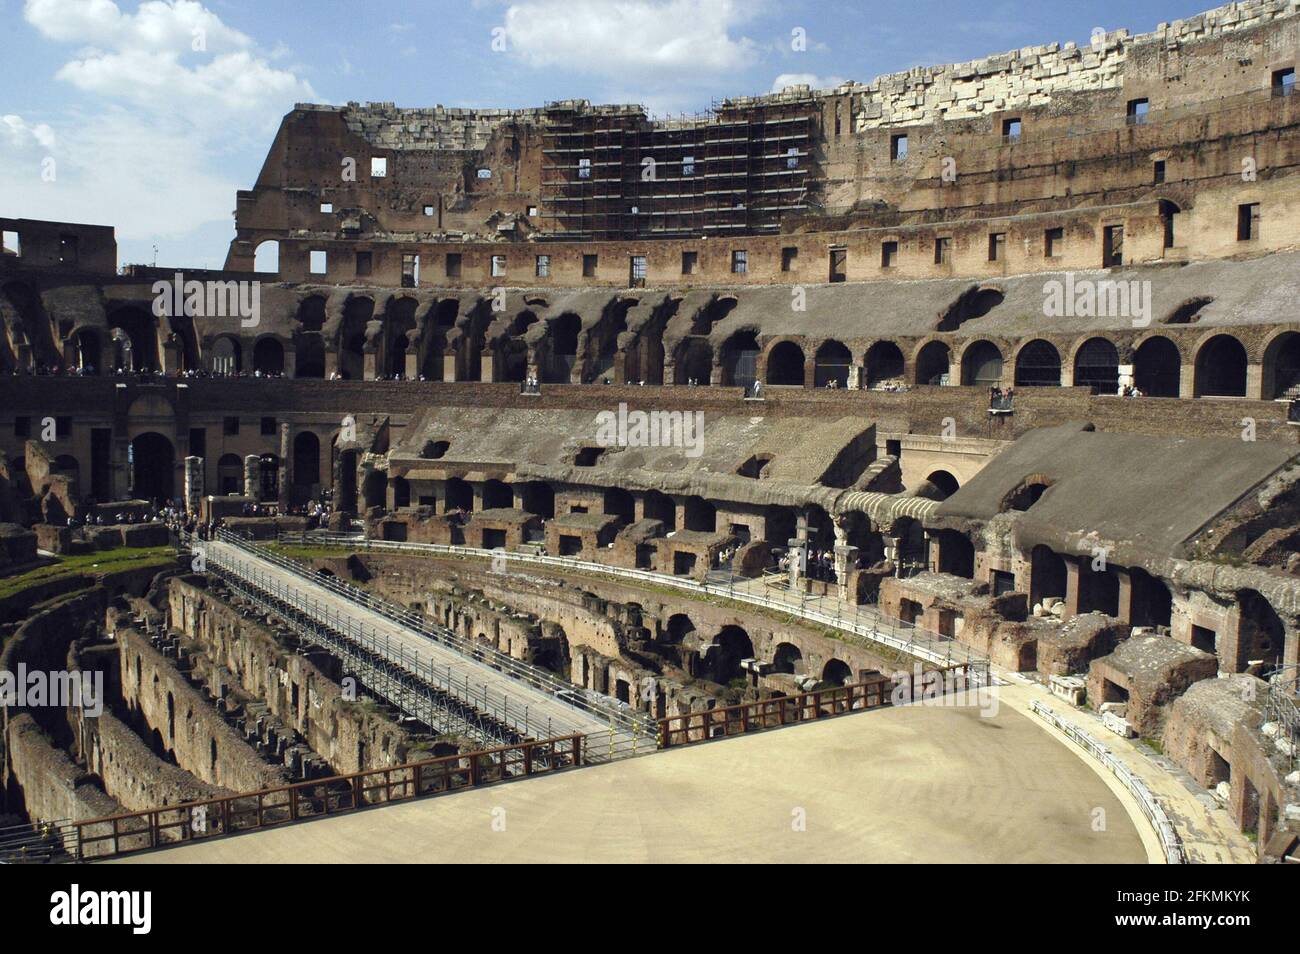 Rome, Italy. 1st Apr, 2005. The Roman Colosseum is shown April 1, 2005.  Plans were announced May 2, 2021 to allow visitors to stand in the middle  of the historic arena on